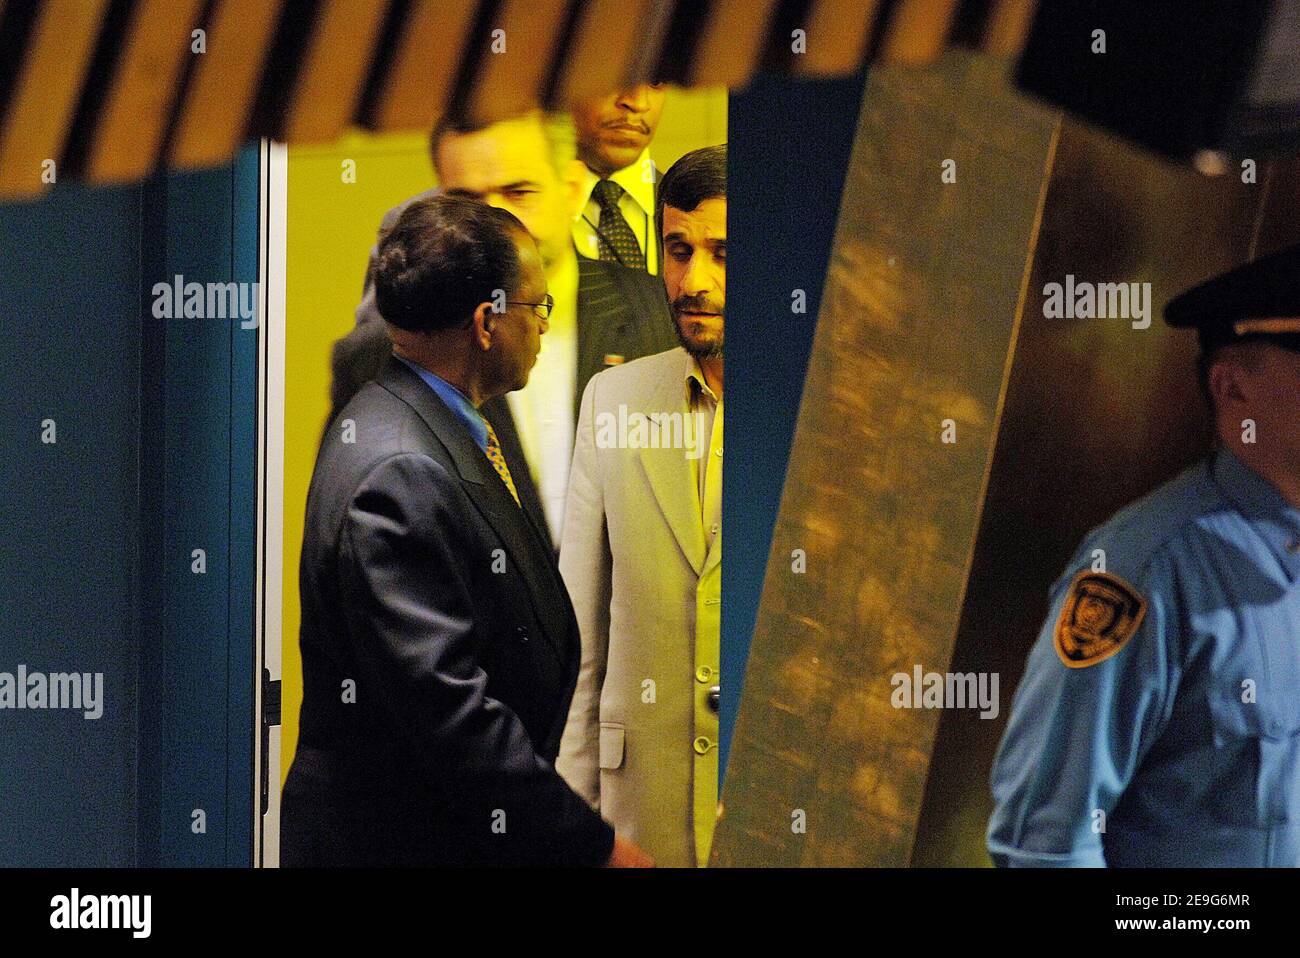 Iranian President Mahmoud Ahmadinejad arrives to address the 61st United Nations General Assembly session at the UN headquarters in New York City, NY, USA, on September 19, 2006. Ahmadinejad launched a scathing attack on the United States and Britain, accusing them of using the United Nations to dominate international affairs and prevent his country from having nuclear power. Photo by Olivier Douliery/ABACAPRESS.COM Stock Photo